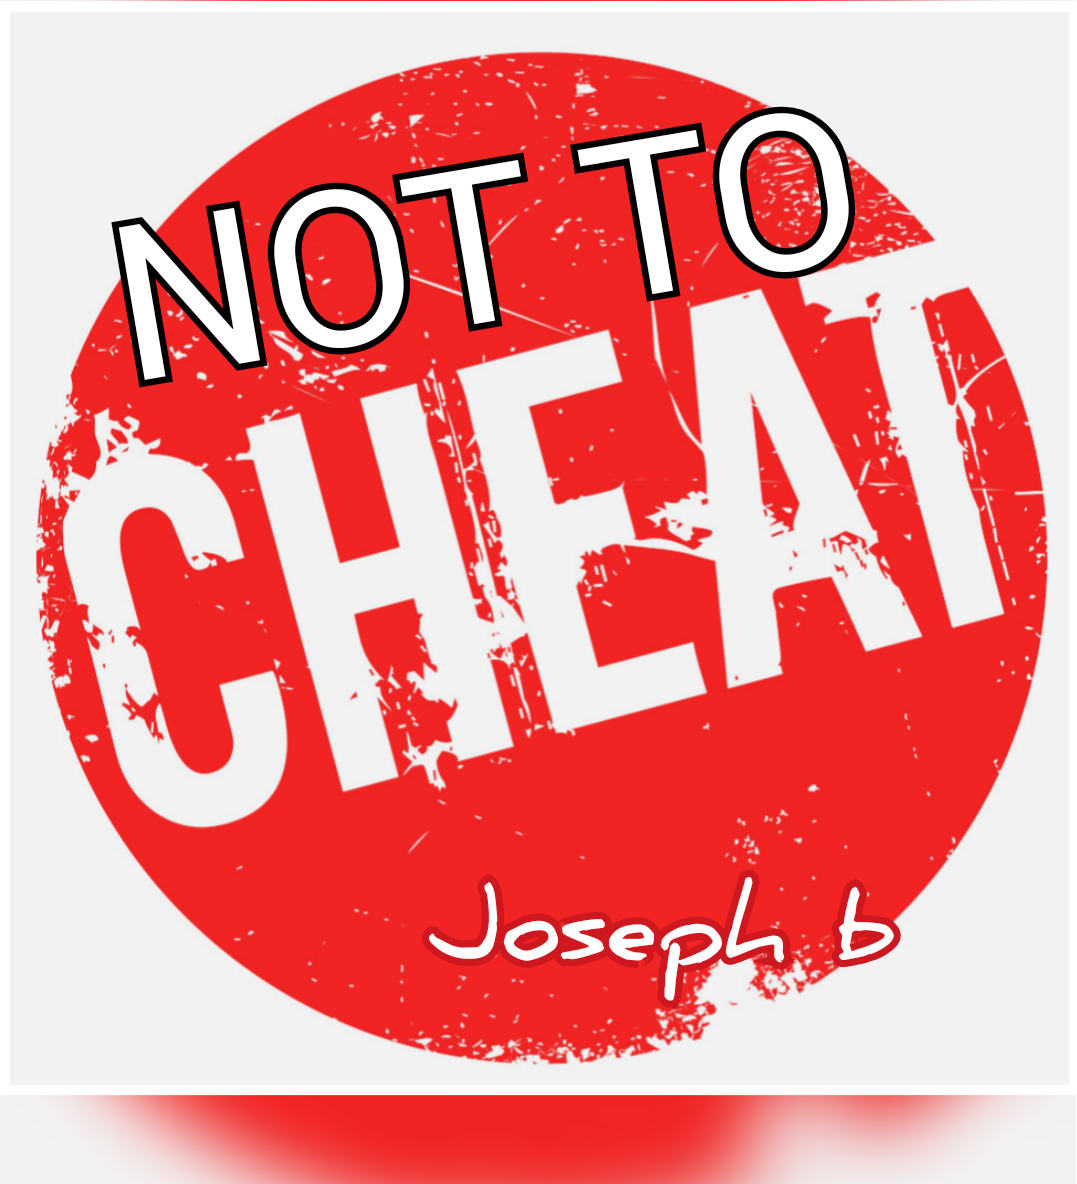 Not To Cheat by Joseph B (Mp4 Video Magic Download)